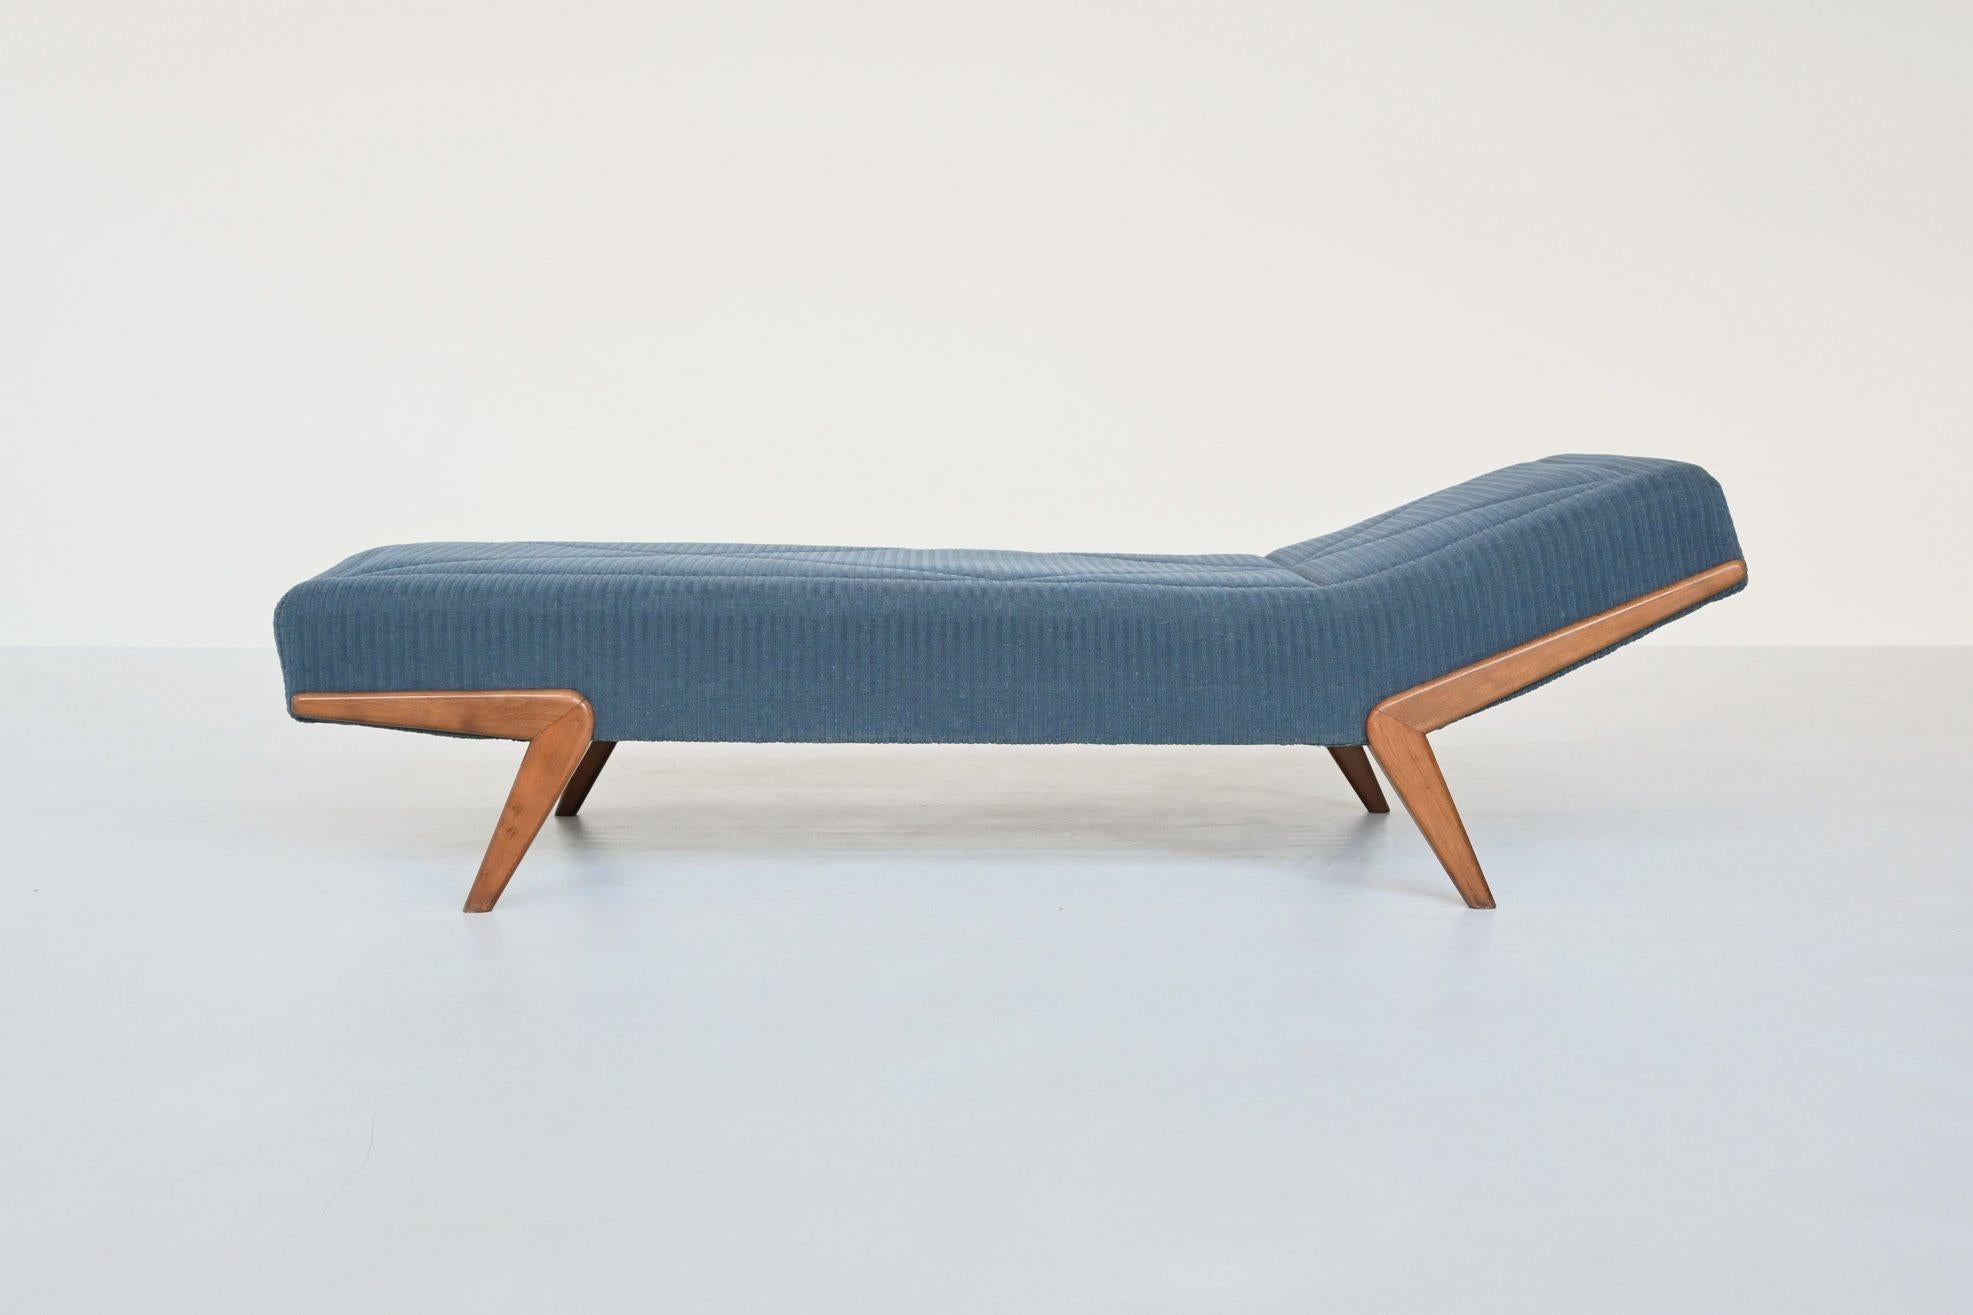 Beautiful shaped Mid Century daybed by unknown manufacturer or designer, Germany 1960. This very nice daybed has solid teak boomerang legs and the mattress is upholstered with original jeans blue fabric. This upholstery is a great contrast with the